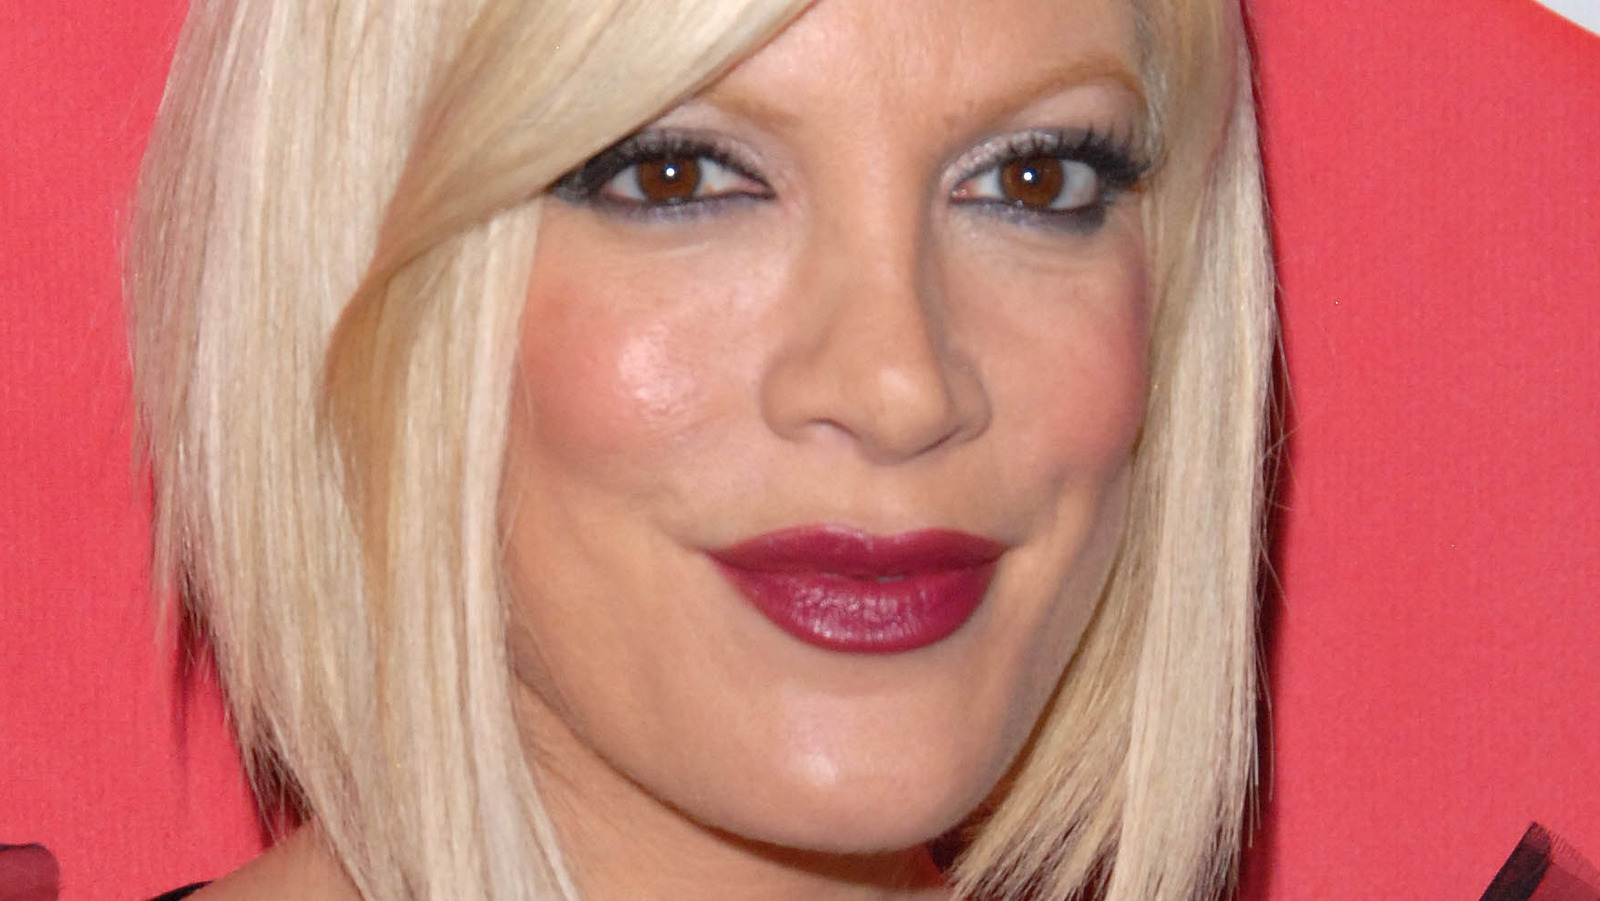 The Real Reason The Tori Spelling Divorce Rumors Are Heating Up